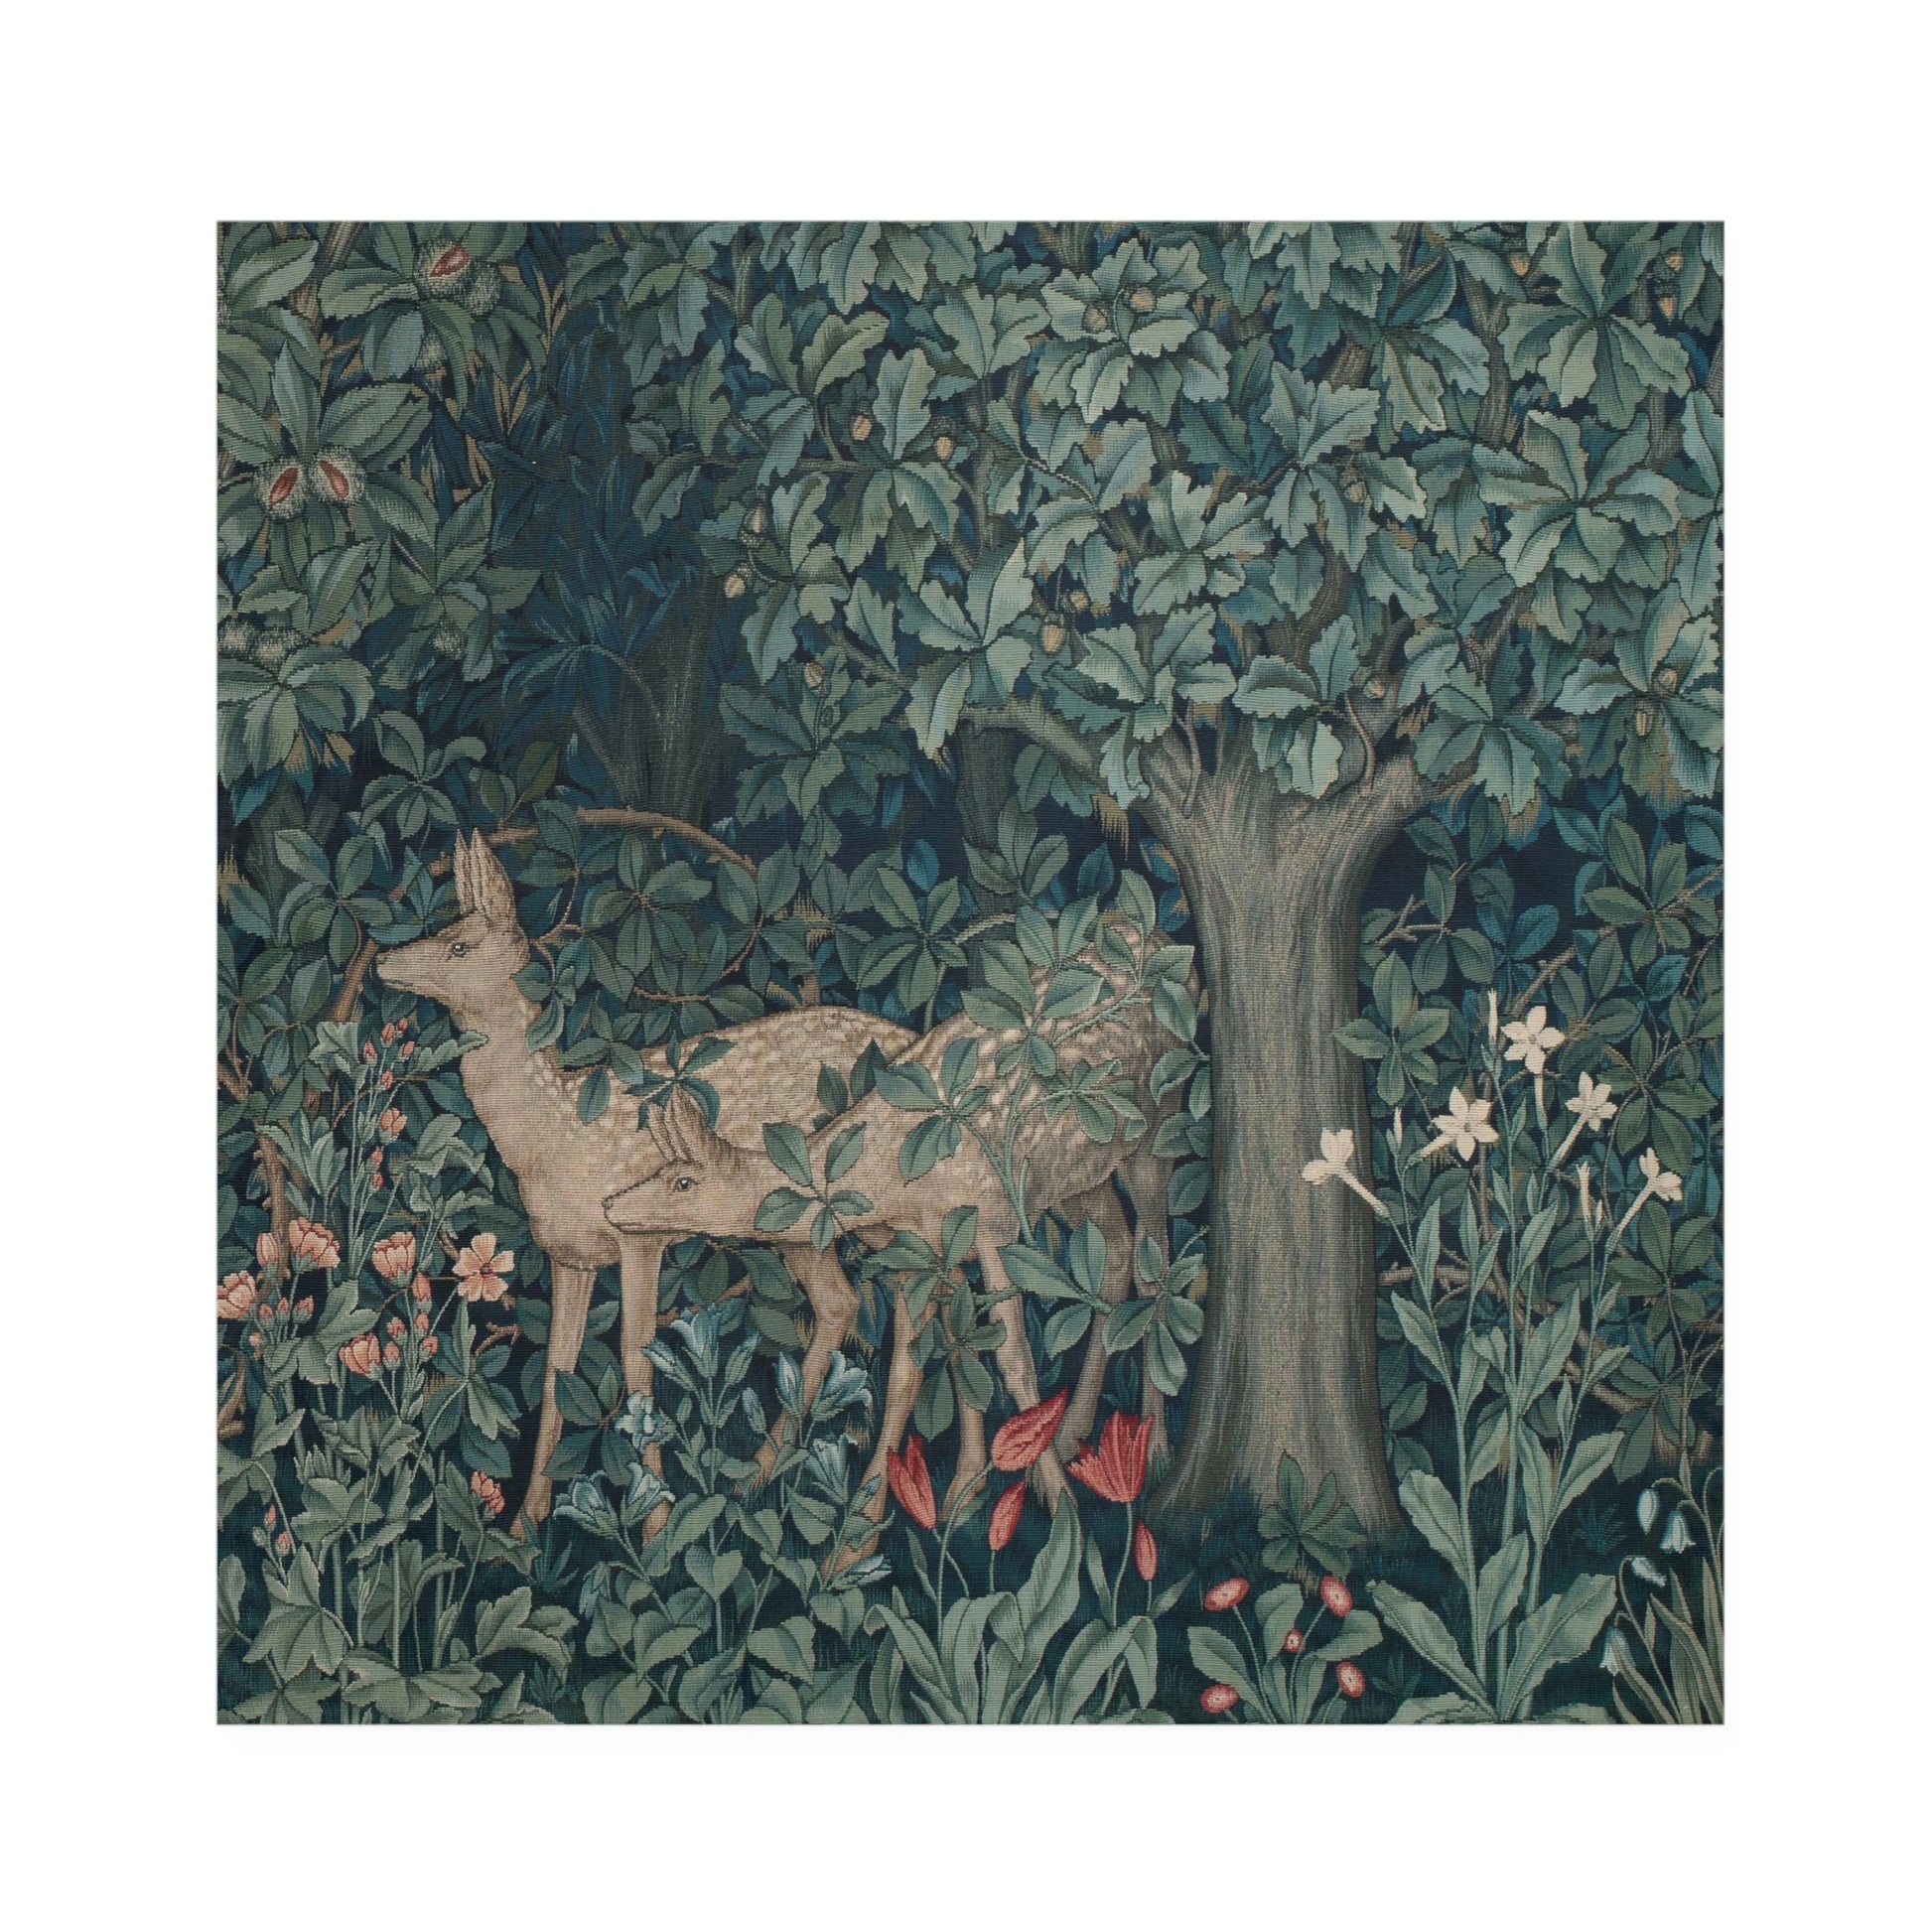 William-Morris-&-Co-Table-Napkins-Dear-by-John-Henry-Dearle-Green-Forest-Collection-2william-morris-co-table-napkins-greenery-collection-dear-2